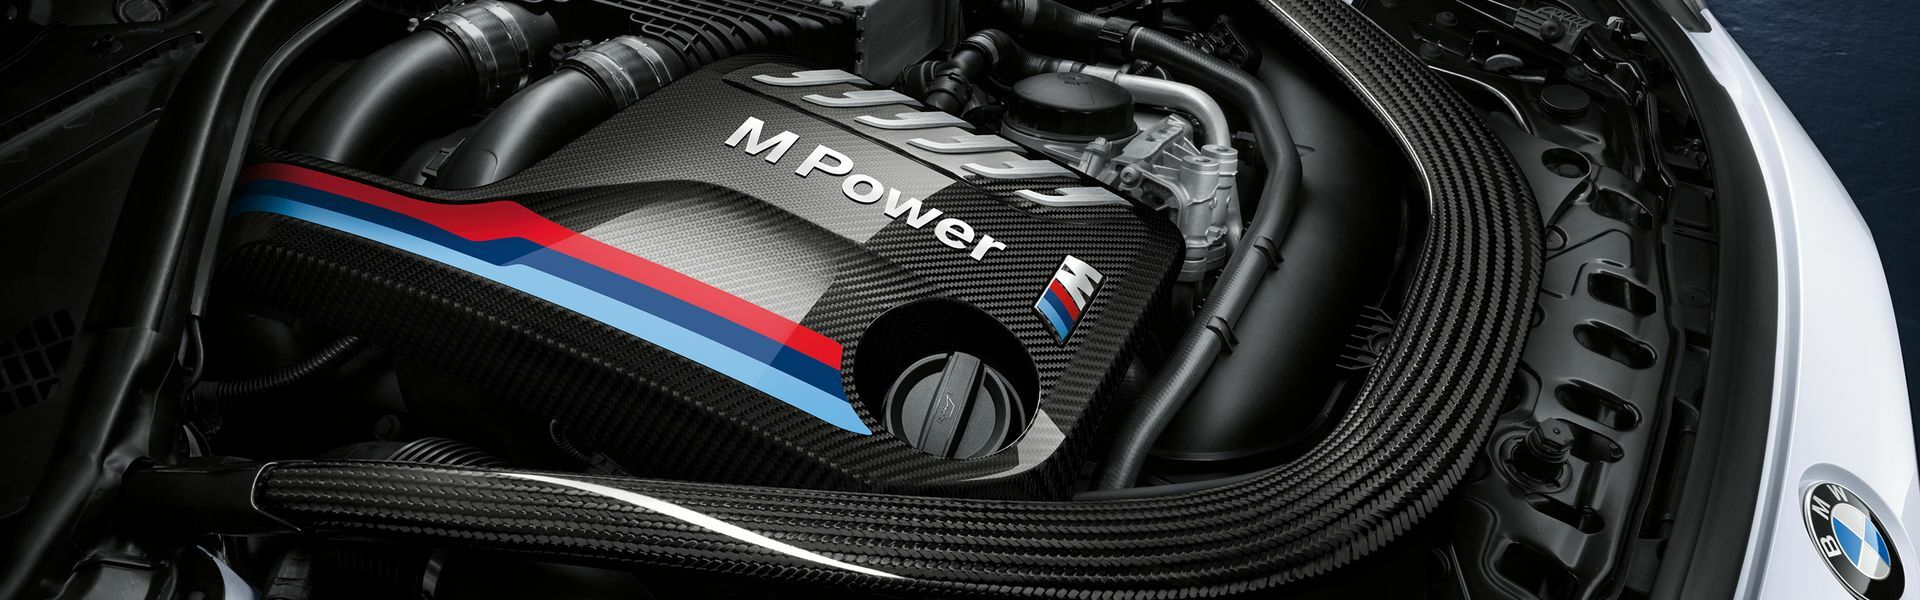 Performance enhancements/ Software modifications/ Small performance parts for BMW 1M E82 COUPE